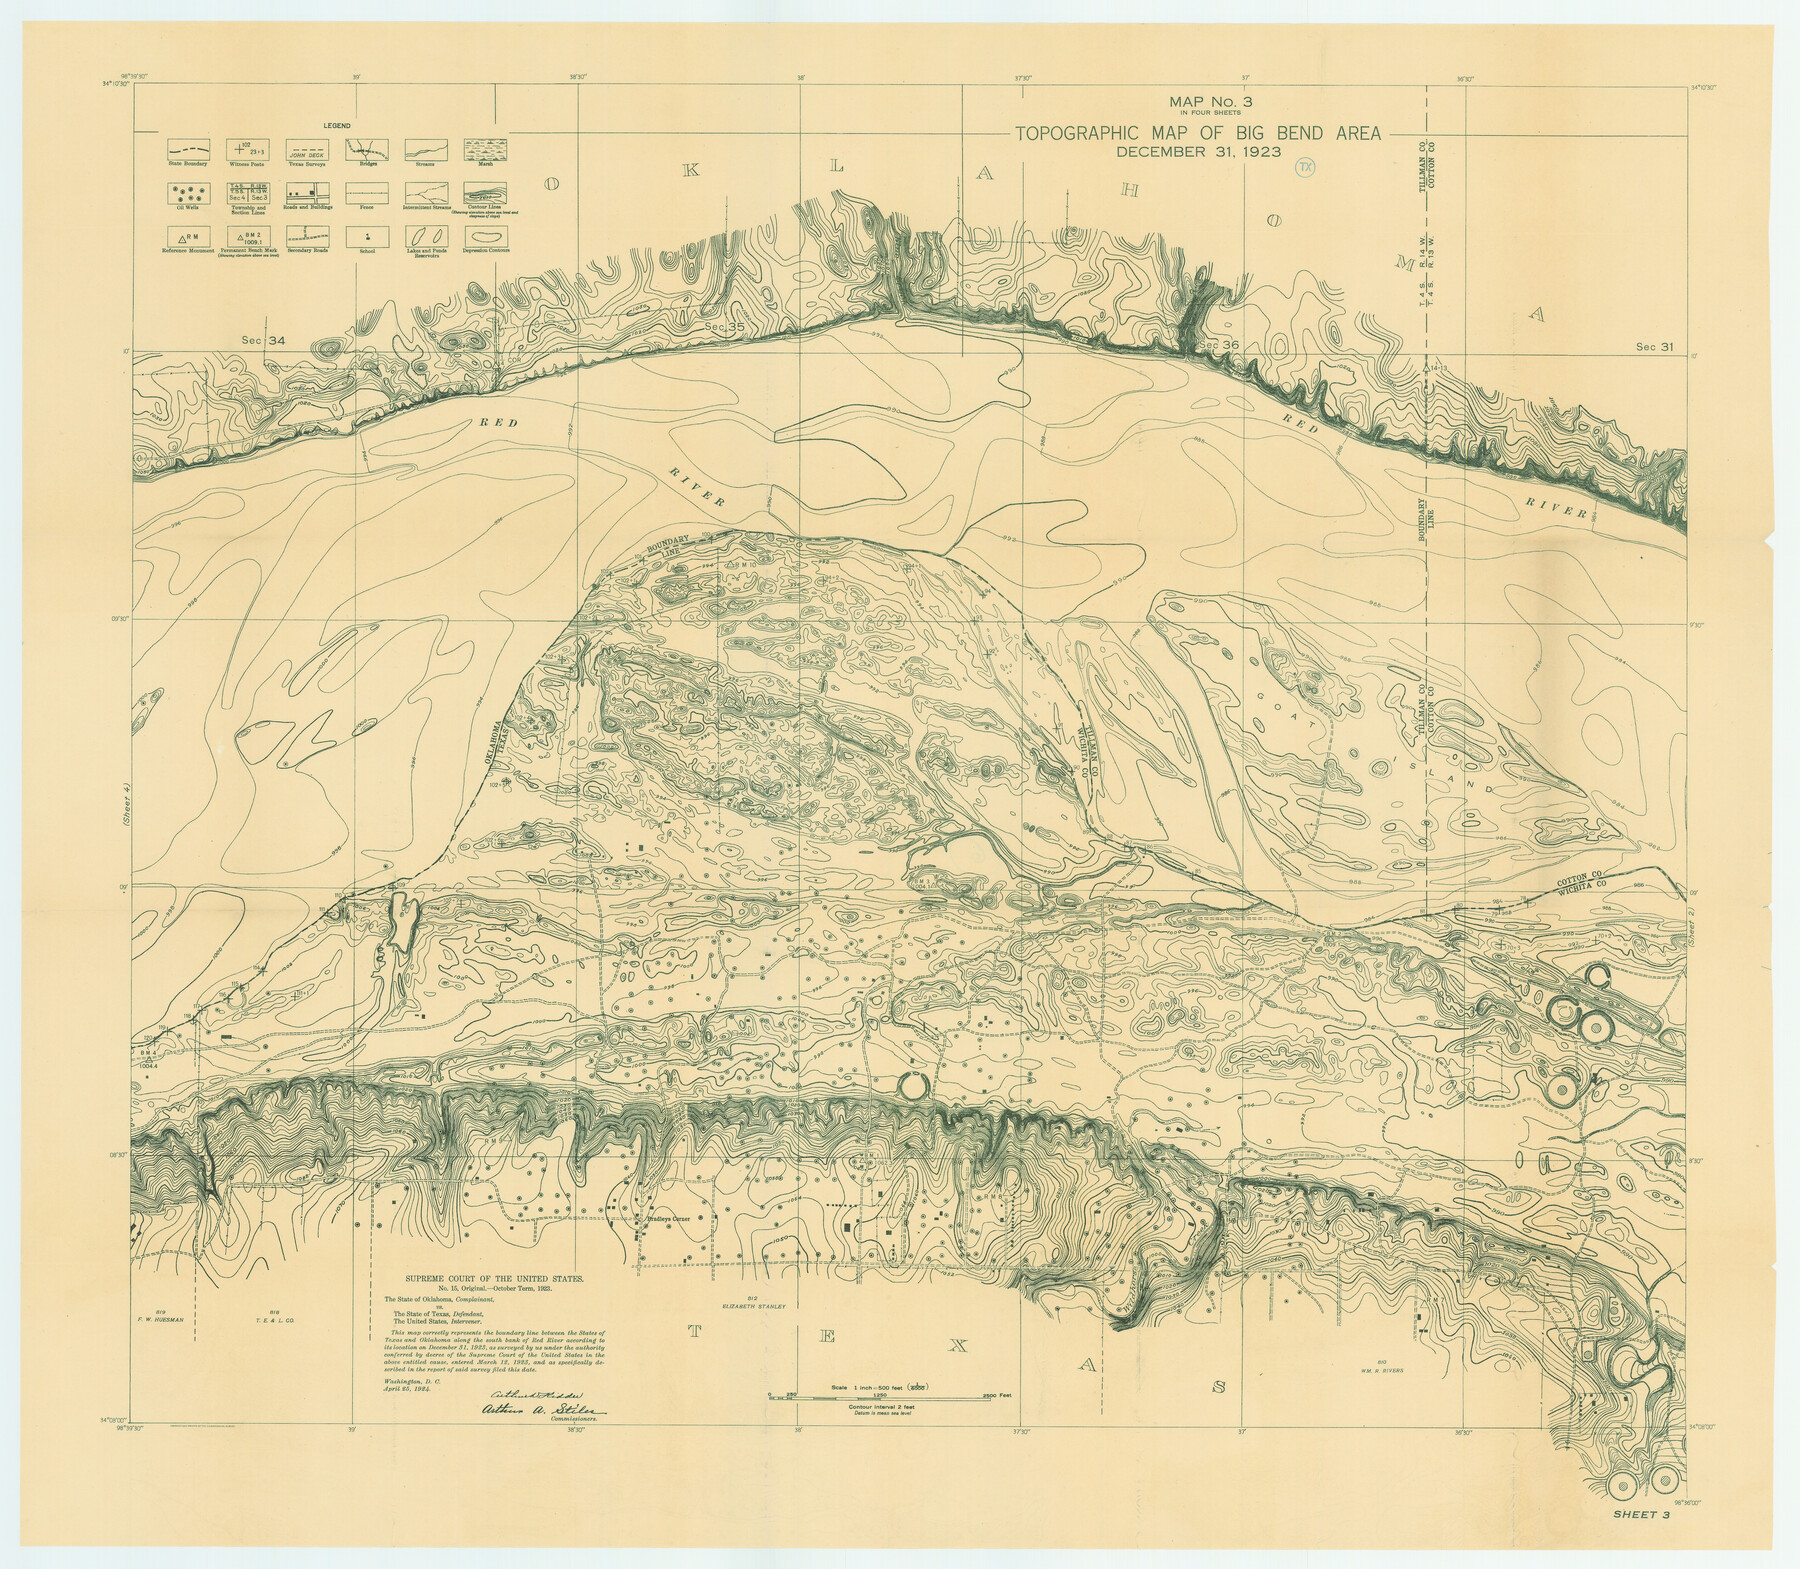 79758, Topographic Map of Big Bend Area, Texas State Library and Archives